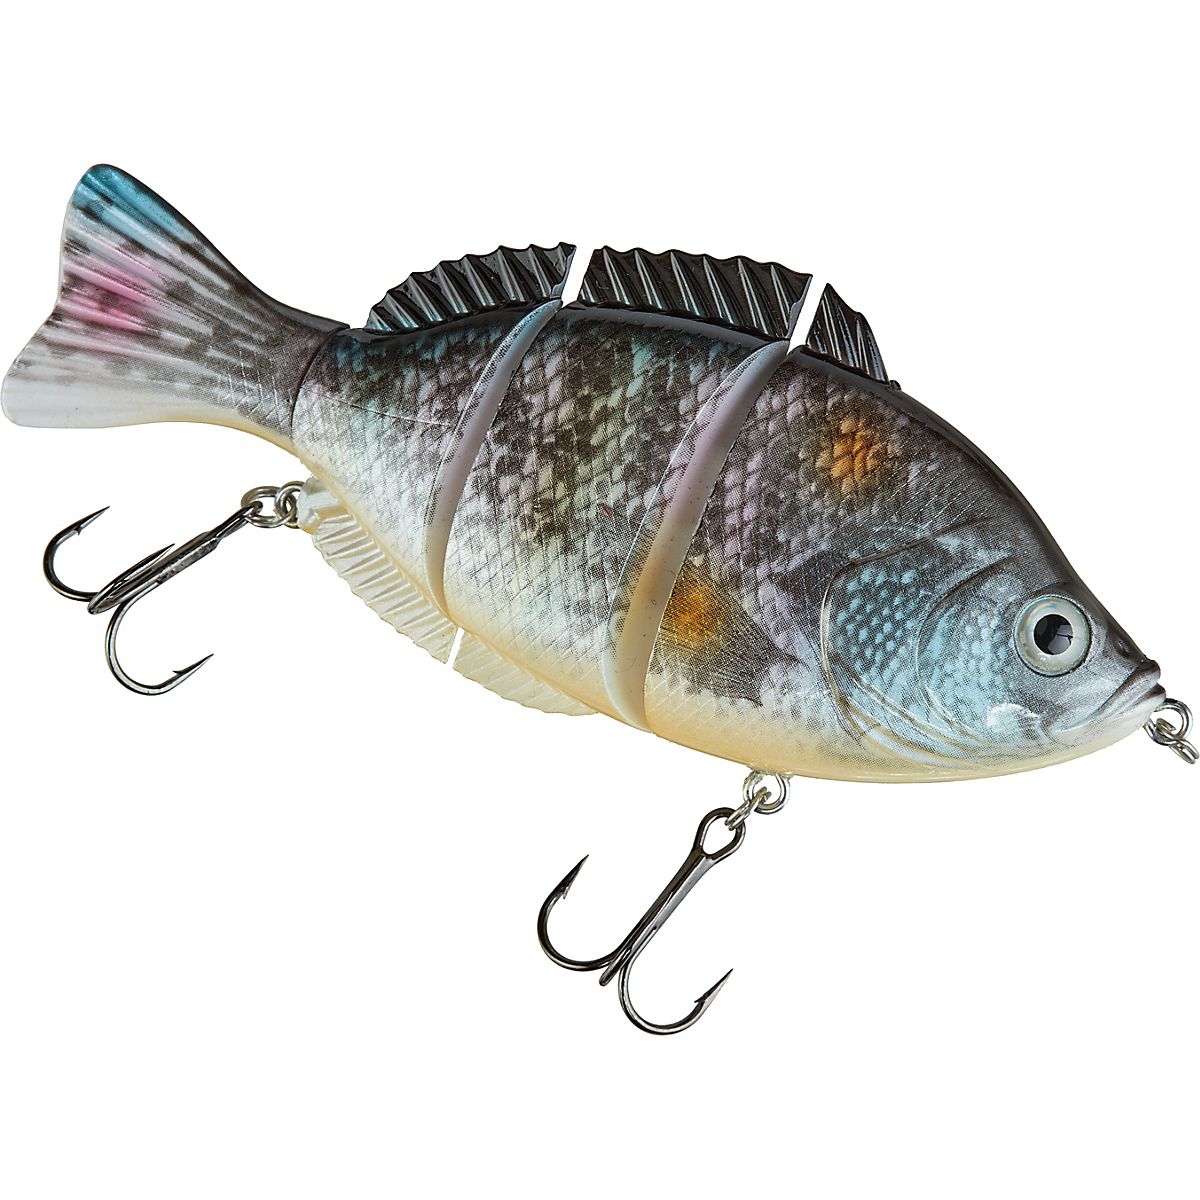 H2O XPRESS 4-1/2 in Jointed Sunfish Swim Bait